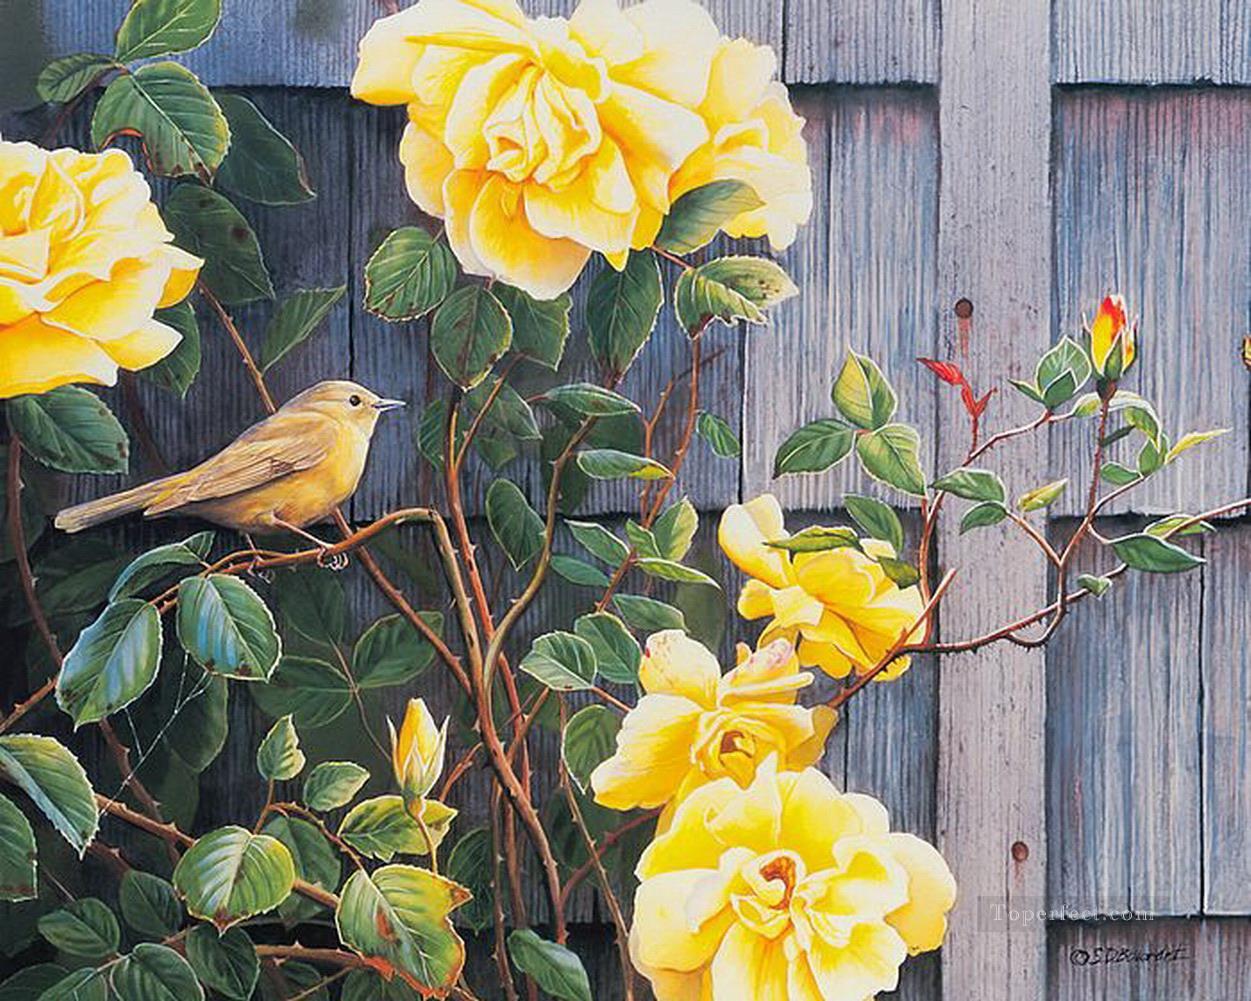 bird and yellow rose Oil Paintings